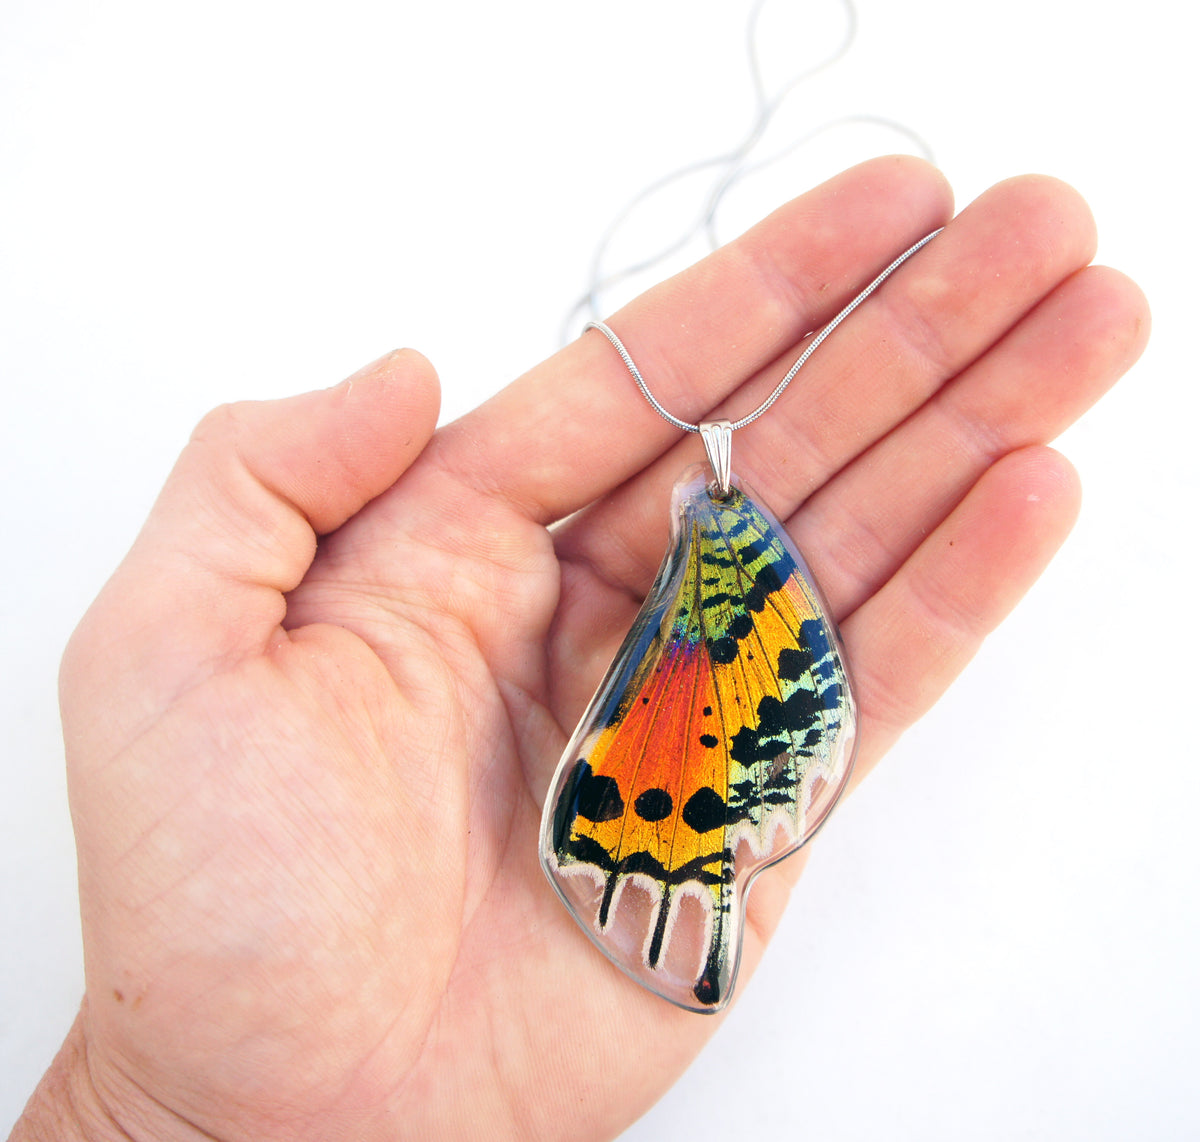 Real Butterfly Wing Heart Pendant Necklace on a Sterling Silver Chain, Multi  Coloured Sunset Moth 